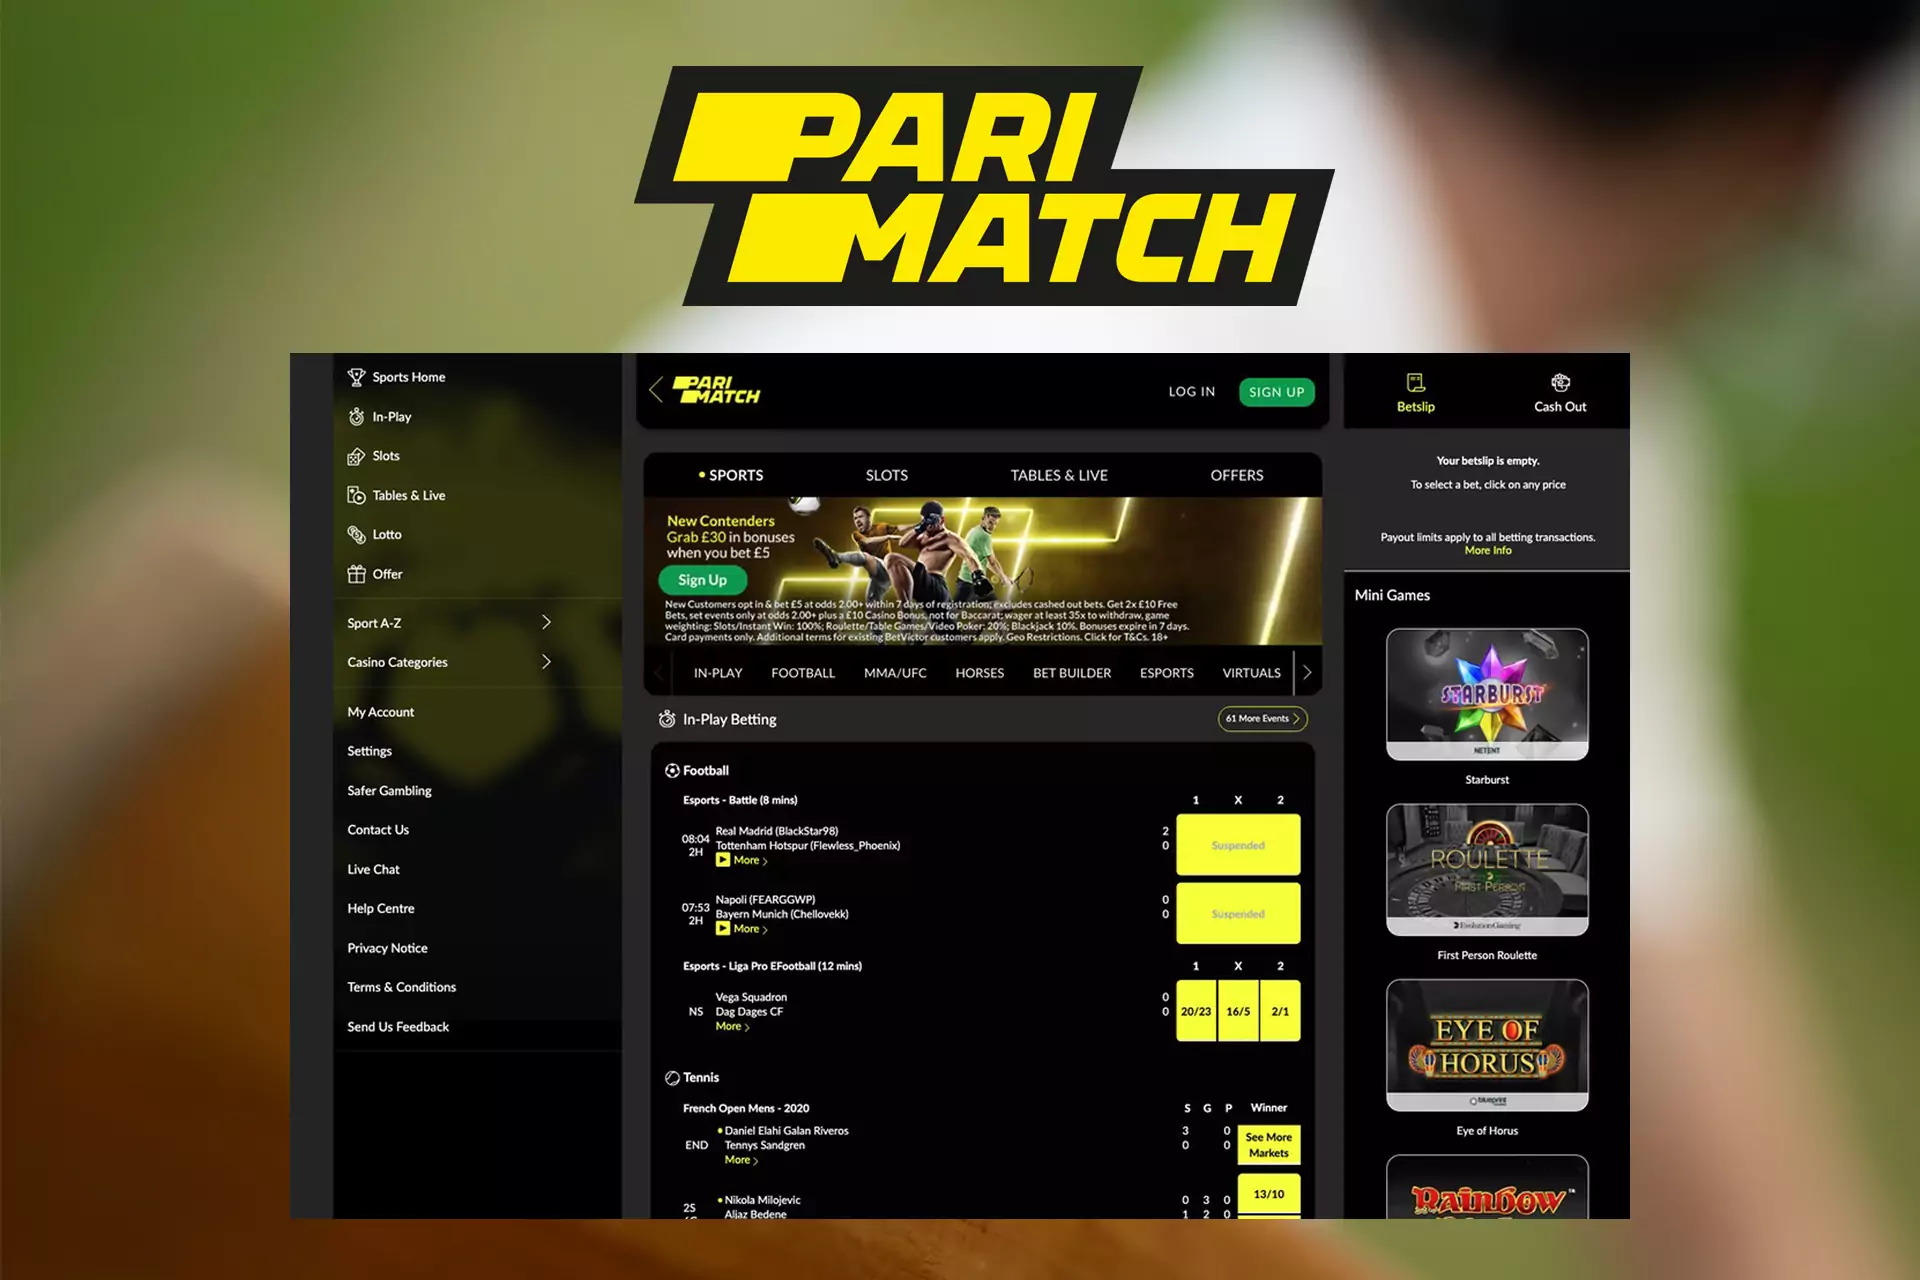 Make your first cricket bet in Parimatch by following the instructions.